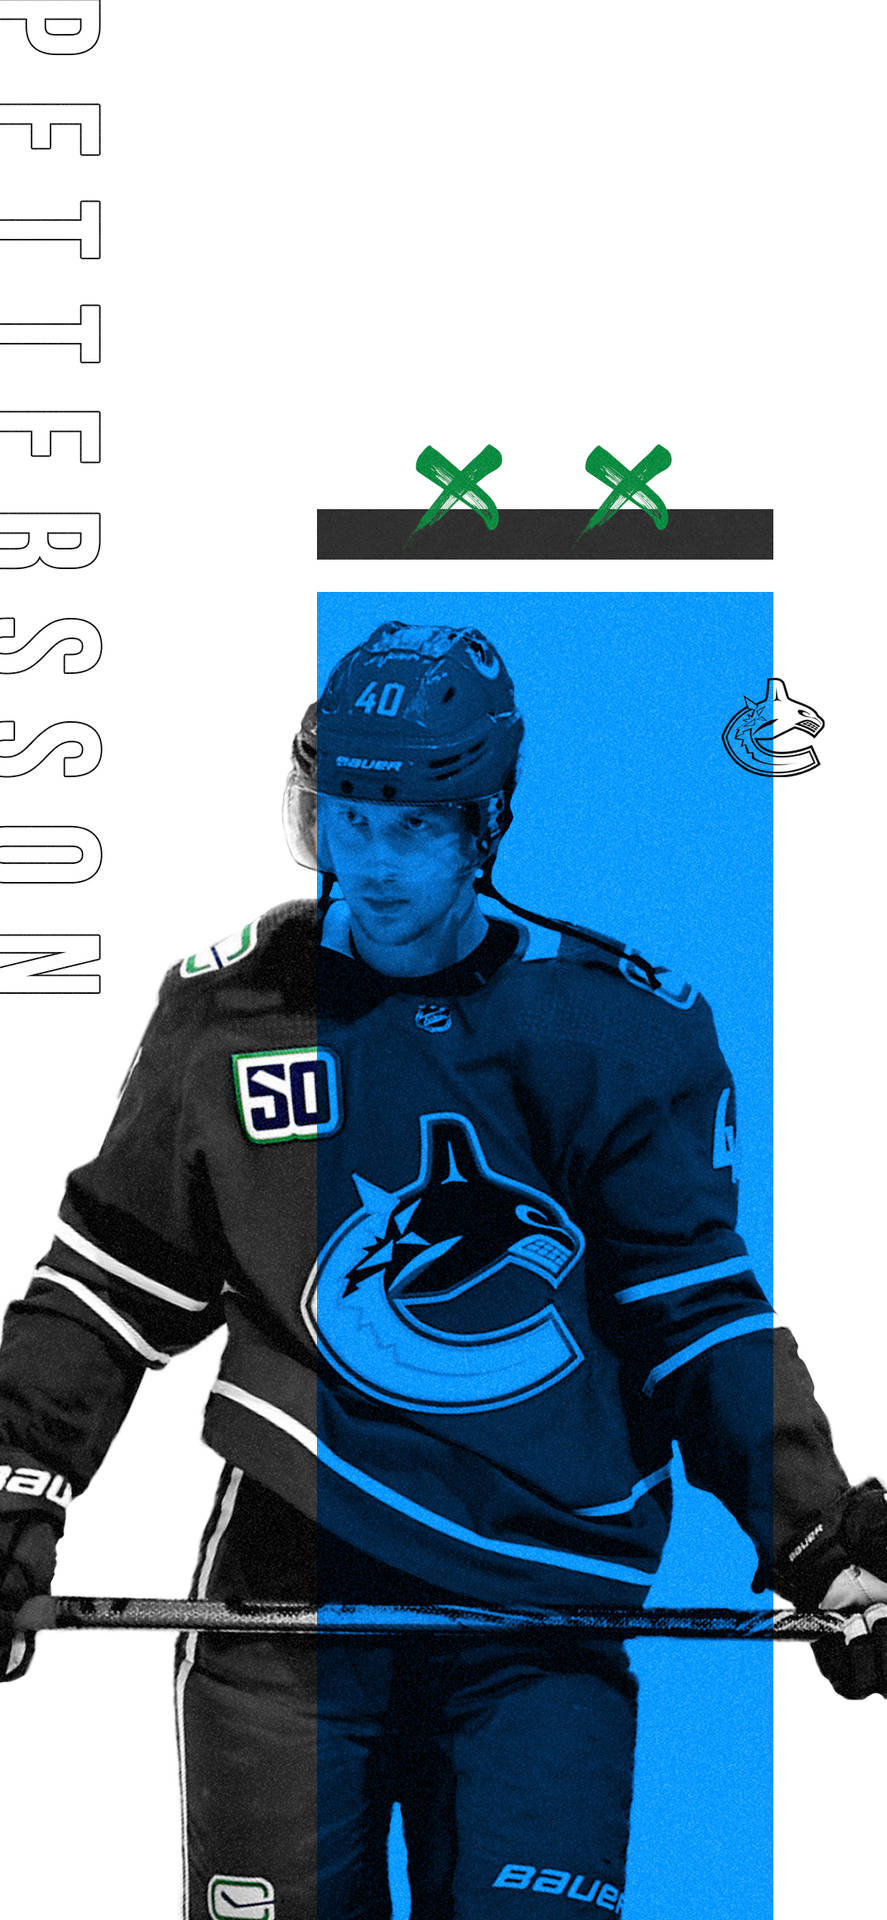 Canadian Nhl Player Elias Pettersson Blue And White Poster